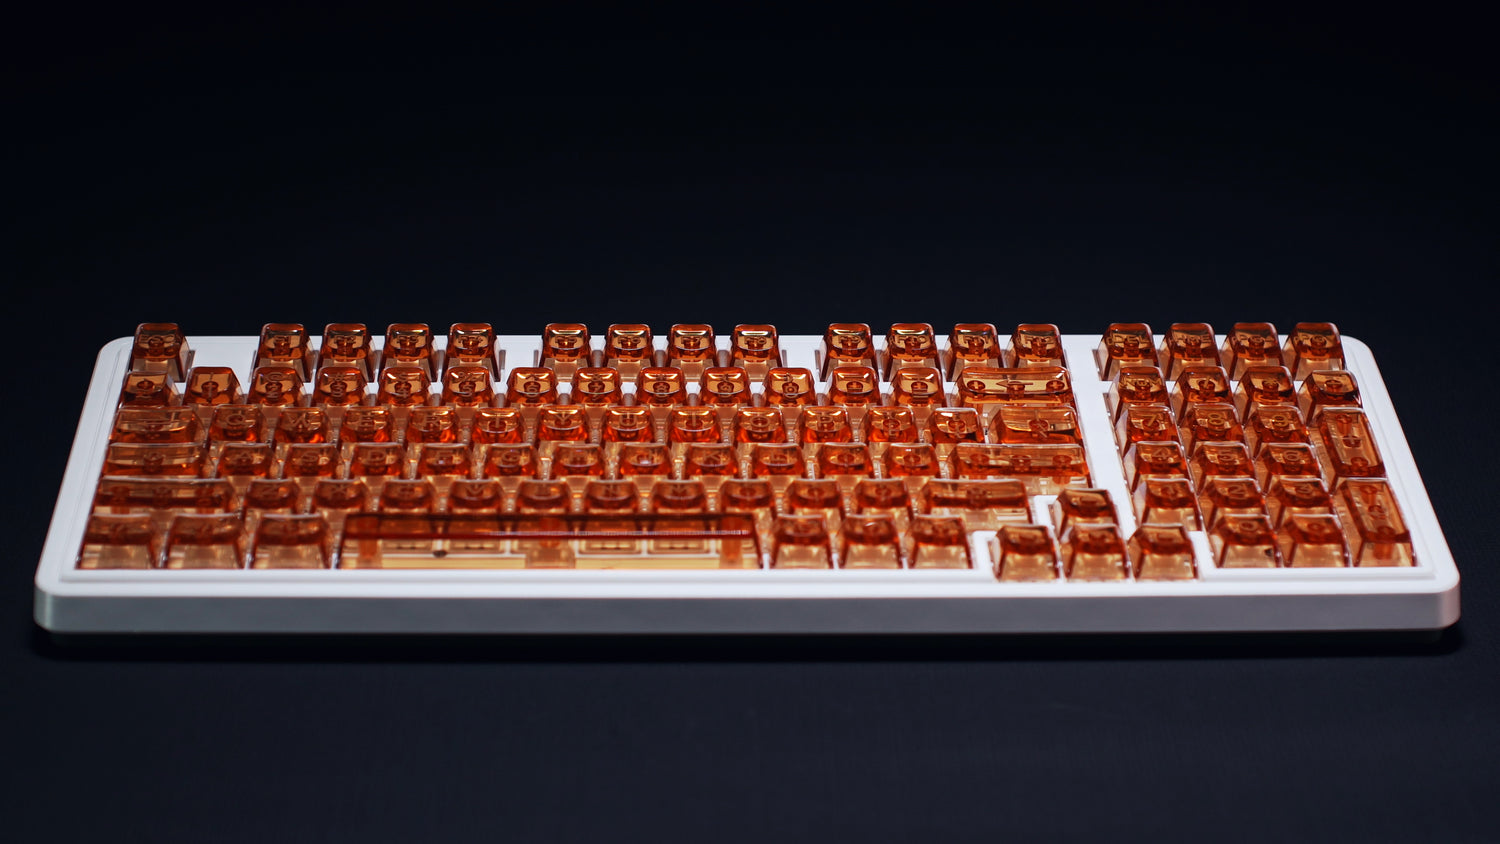 Oshid Amber- The first 3D Legend Keycaps